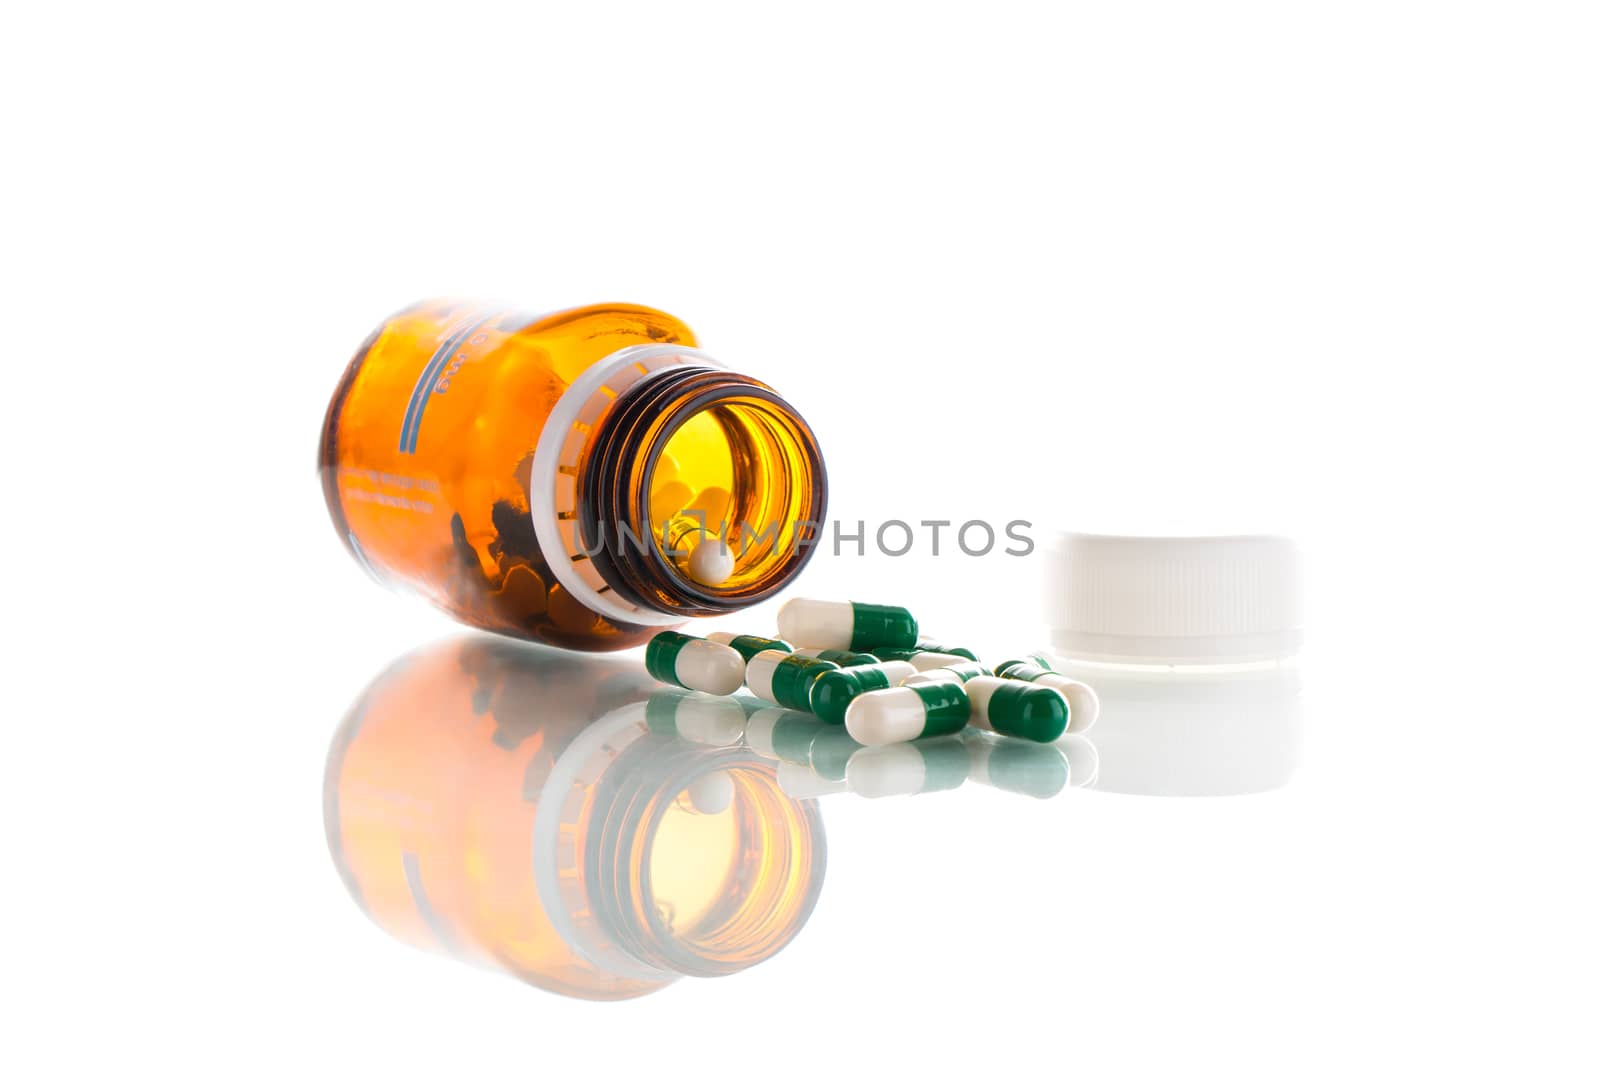 Tablets with bottle by fotoquique